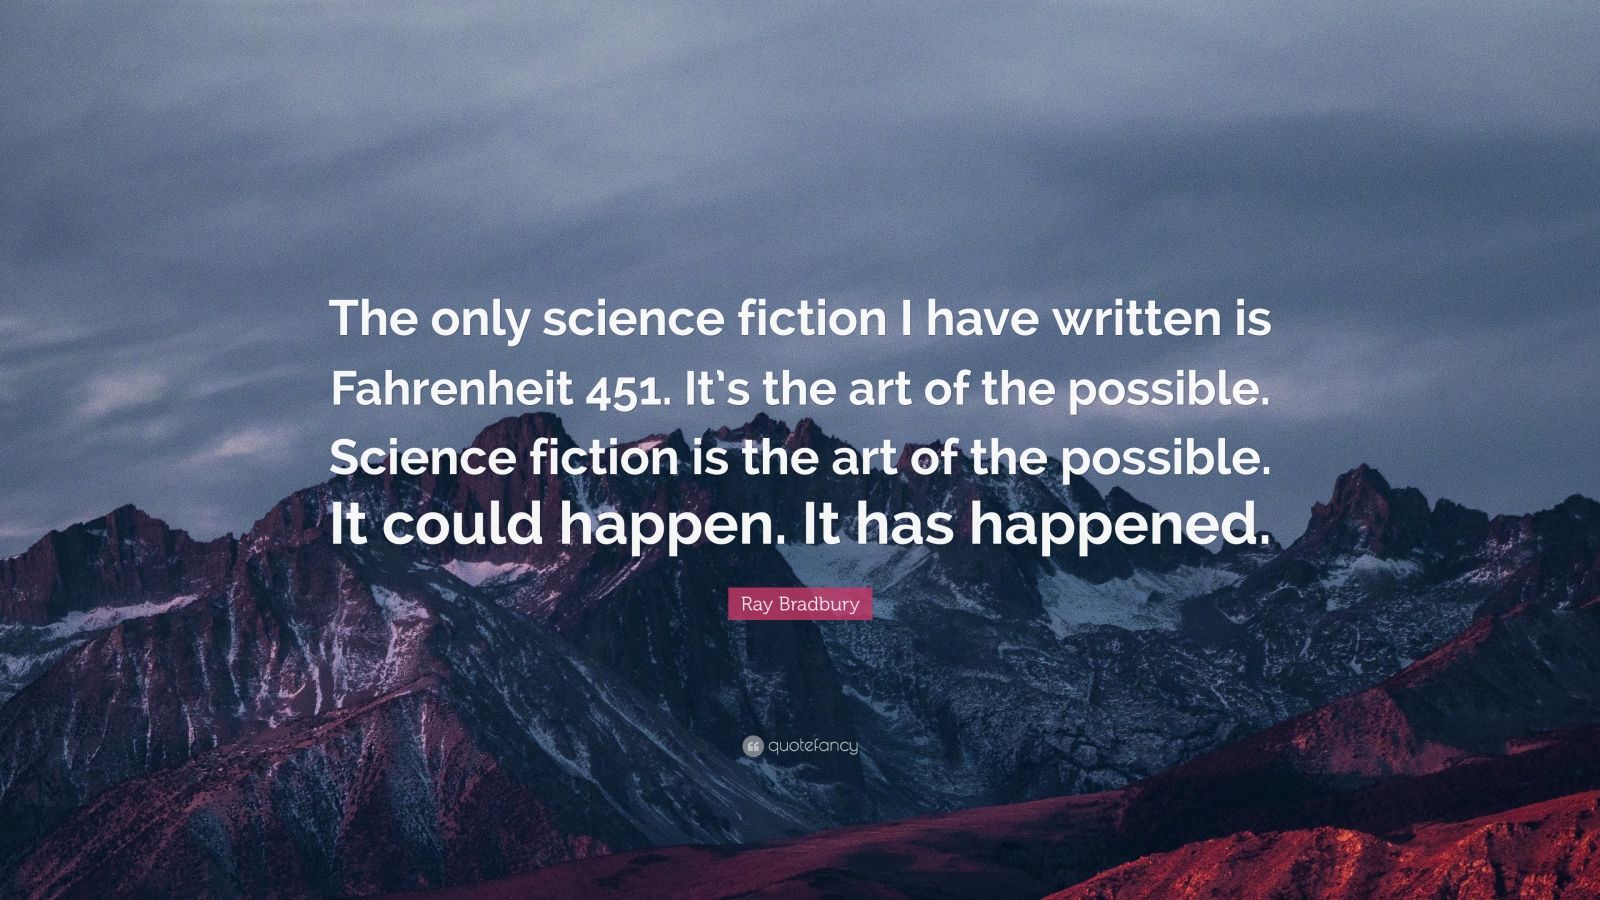 Ray Bradbury Quote “The only science fiction I have